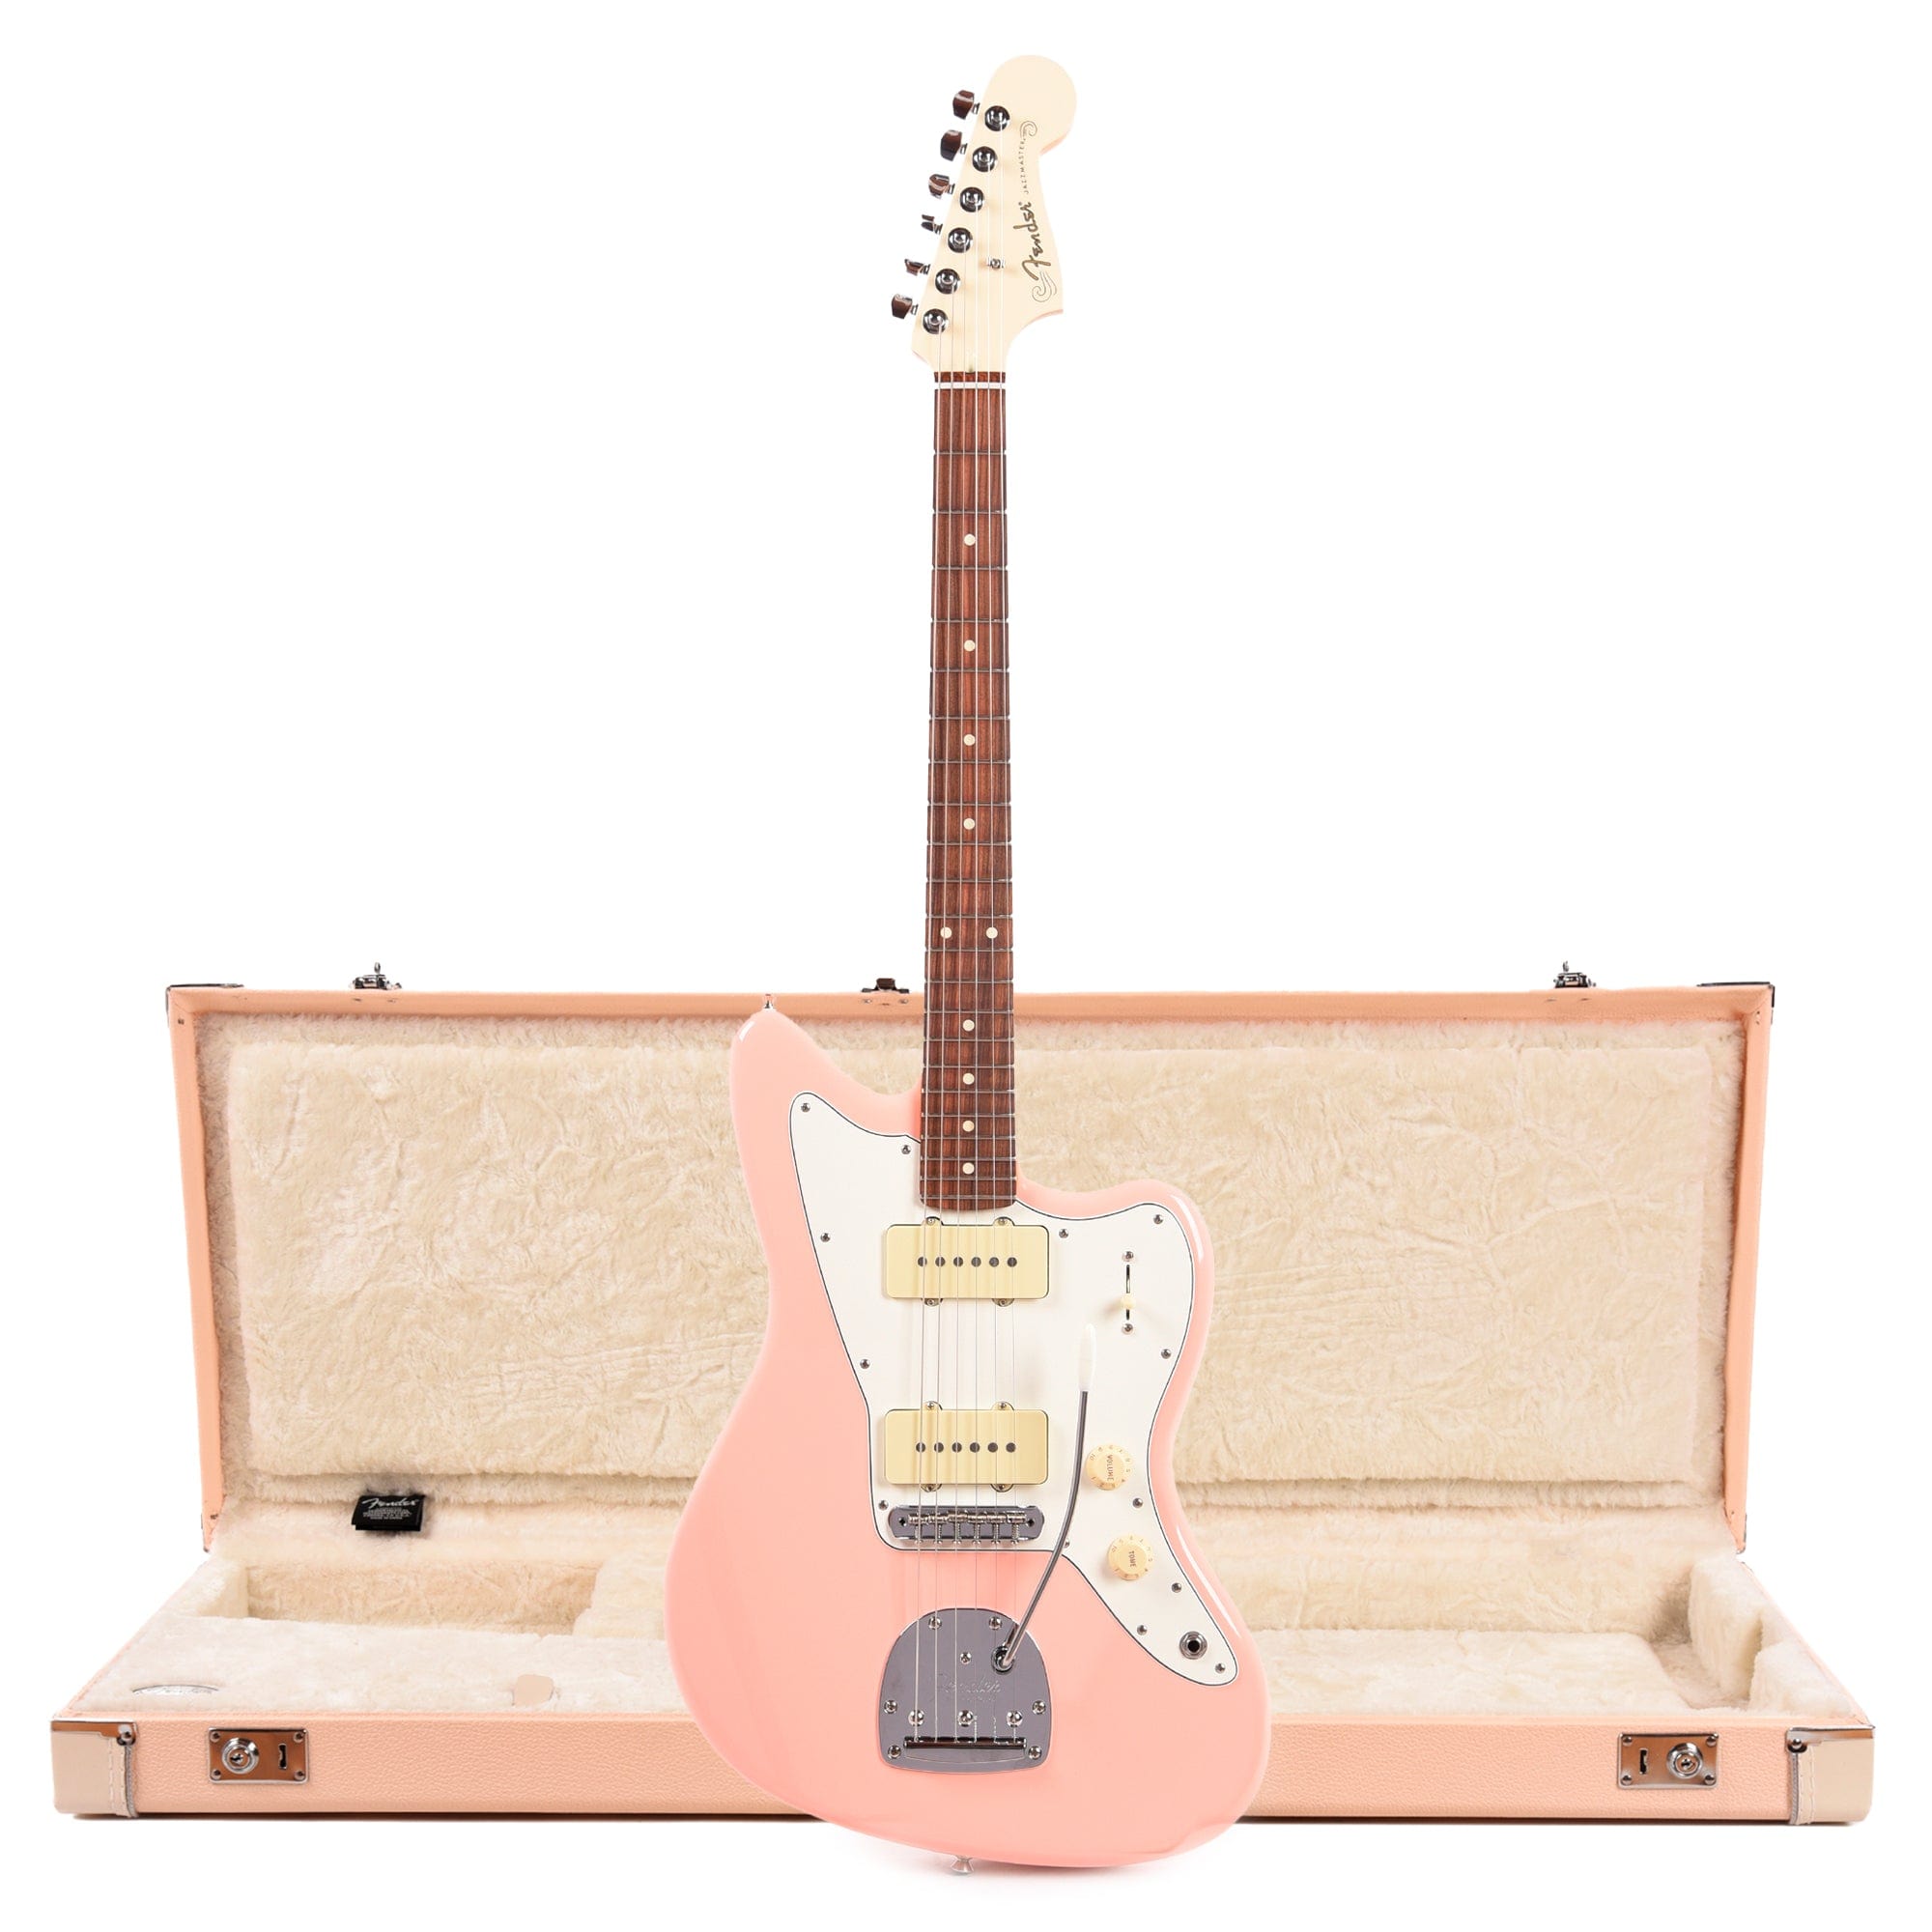 Fender Player Jazzmaster Shell Pink w/Olympic White Headcap, Pure Vintage '65 Pickups, & Series/Parallel 4-Way and Hardshell Case Jazzmaster/Jaguar Shell Pink w/Cream Interior Electric Guitars / Solid Body